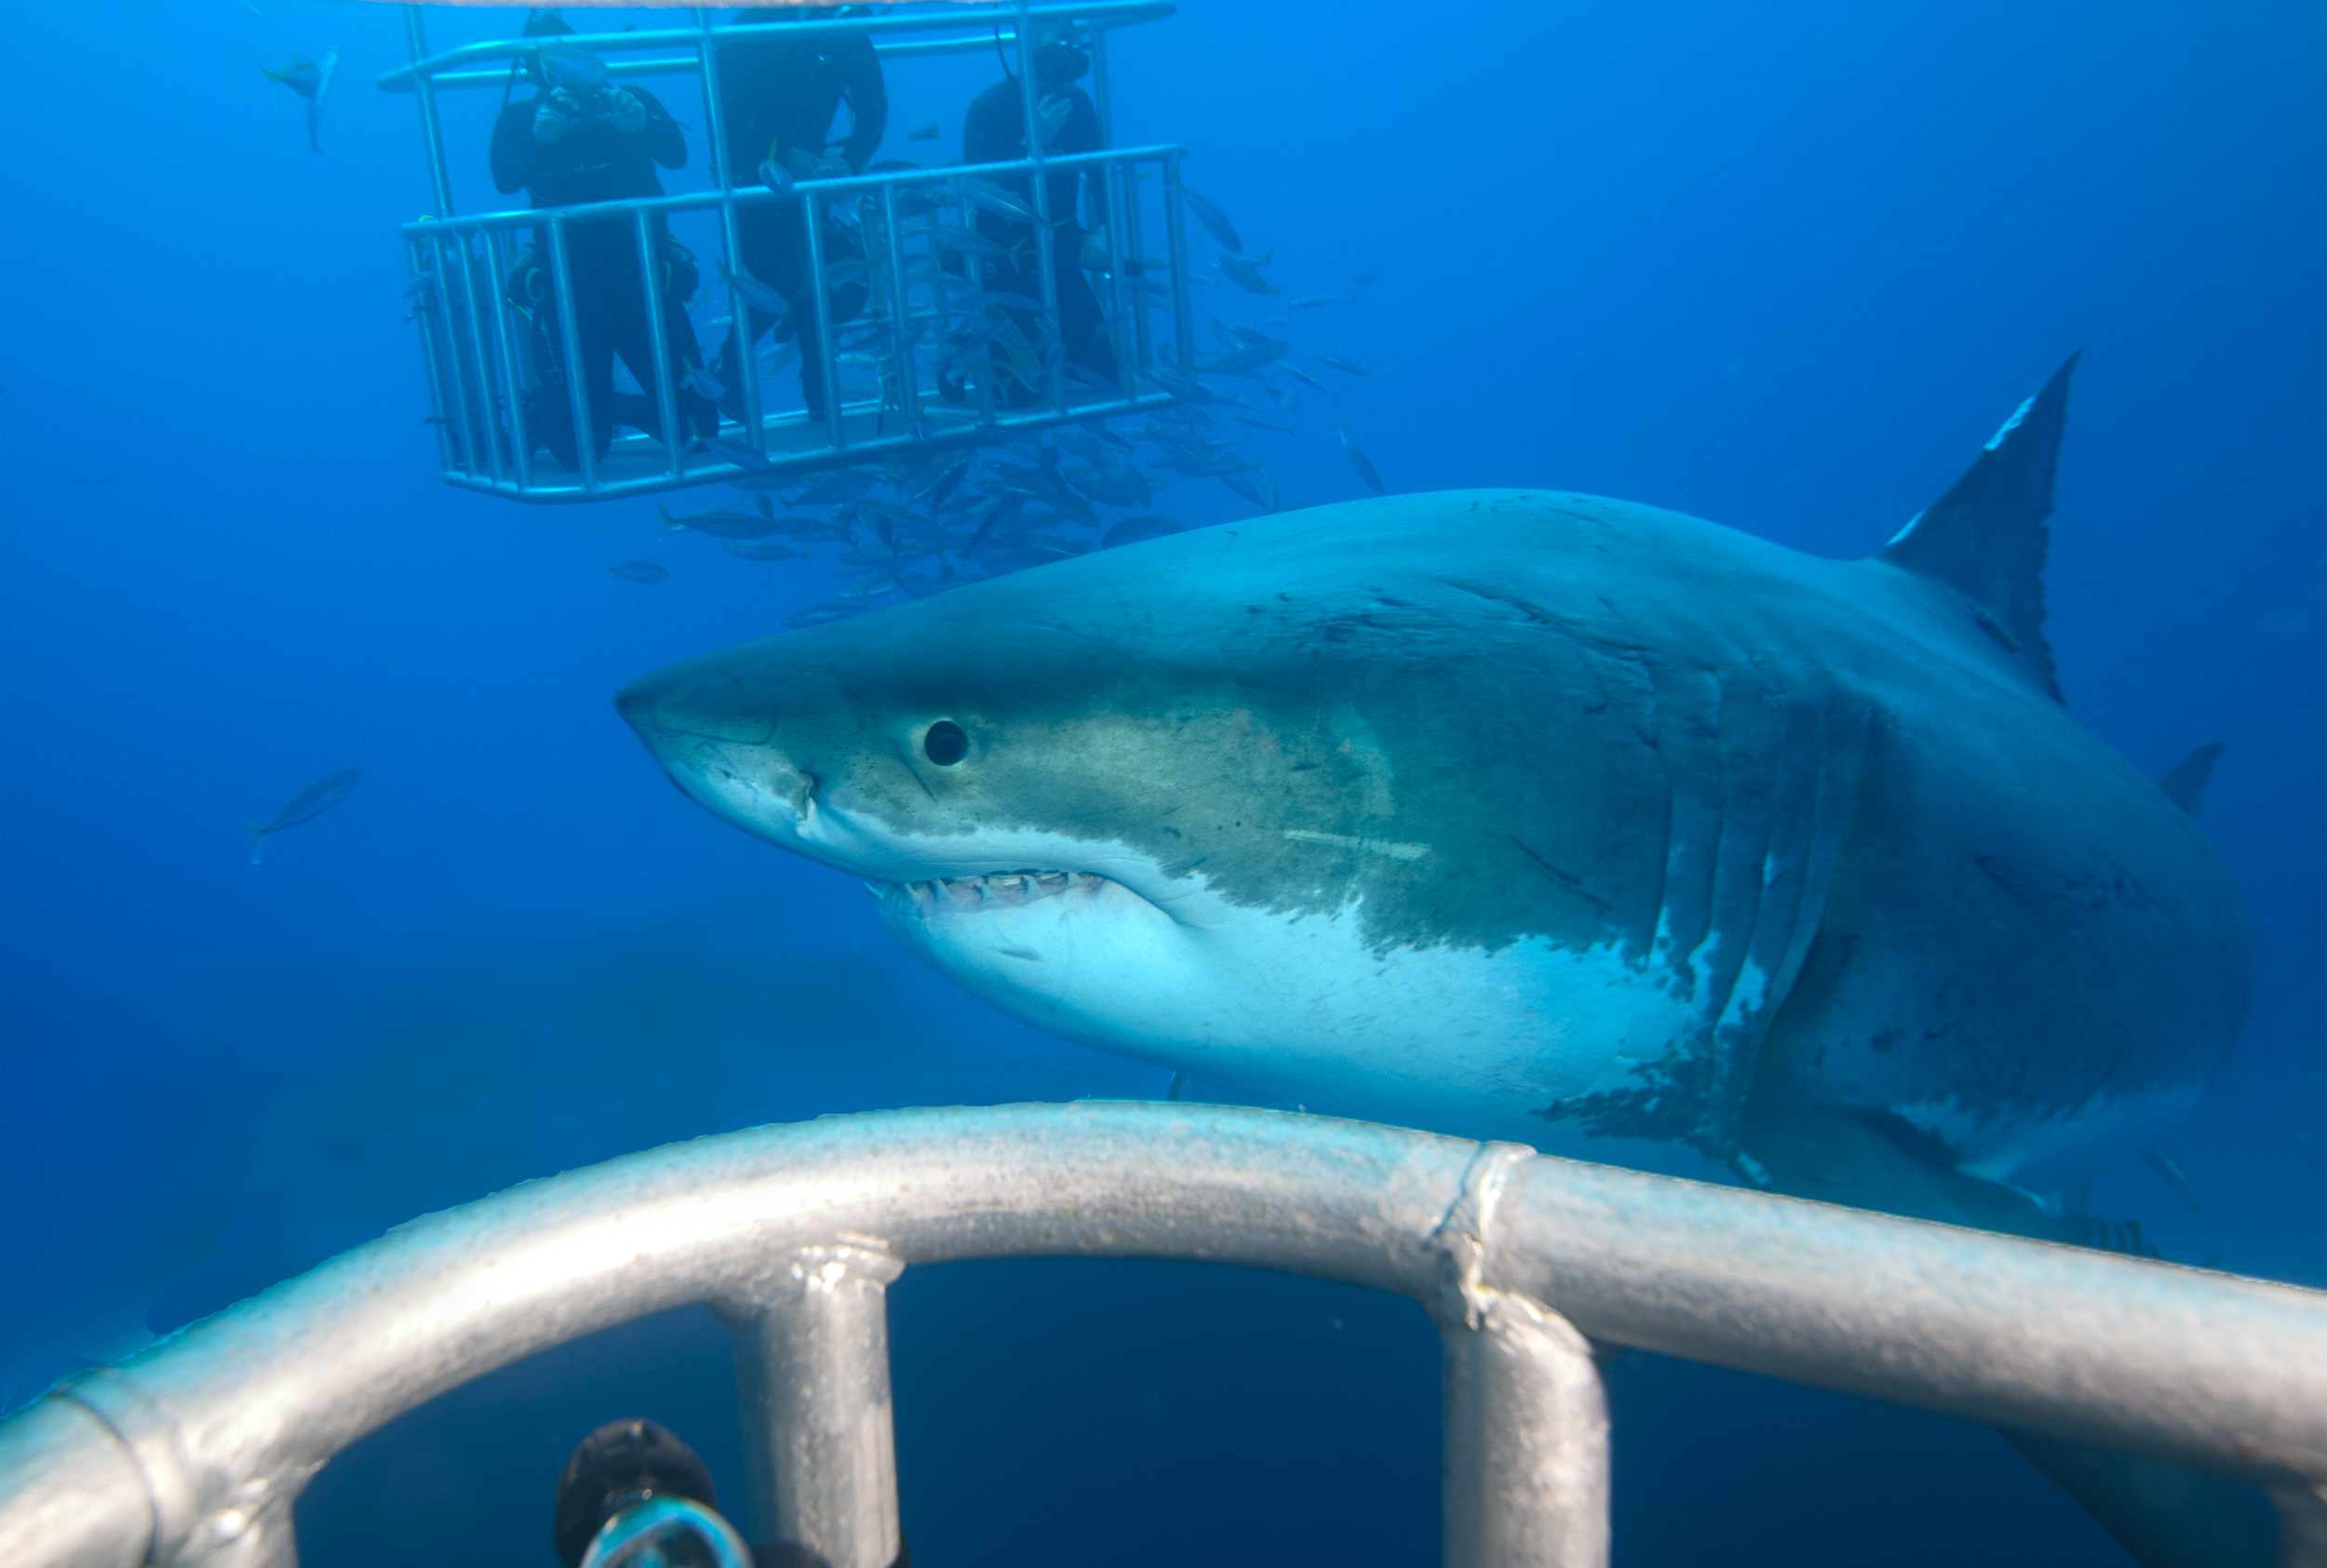 Great white shark at Guadalupe Island. Photo by John A. Ares